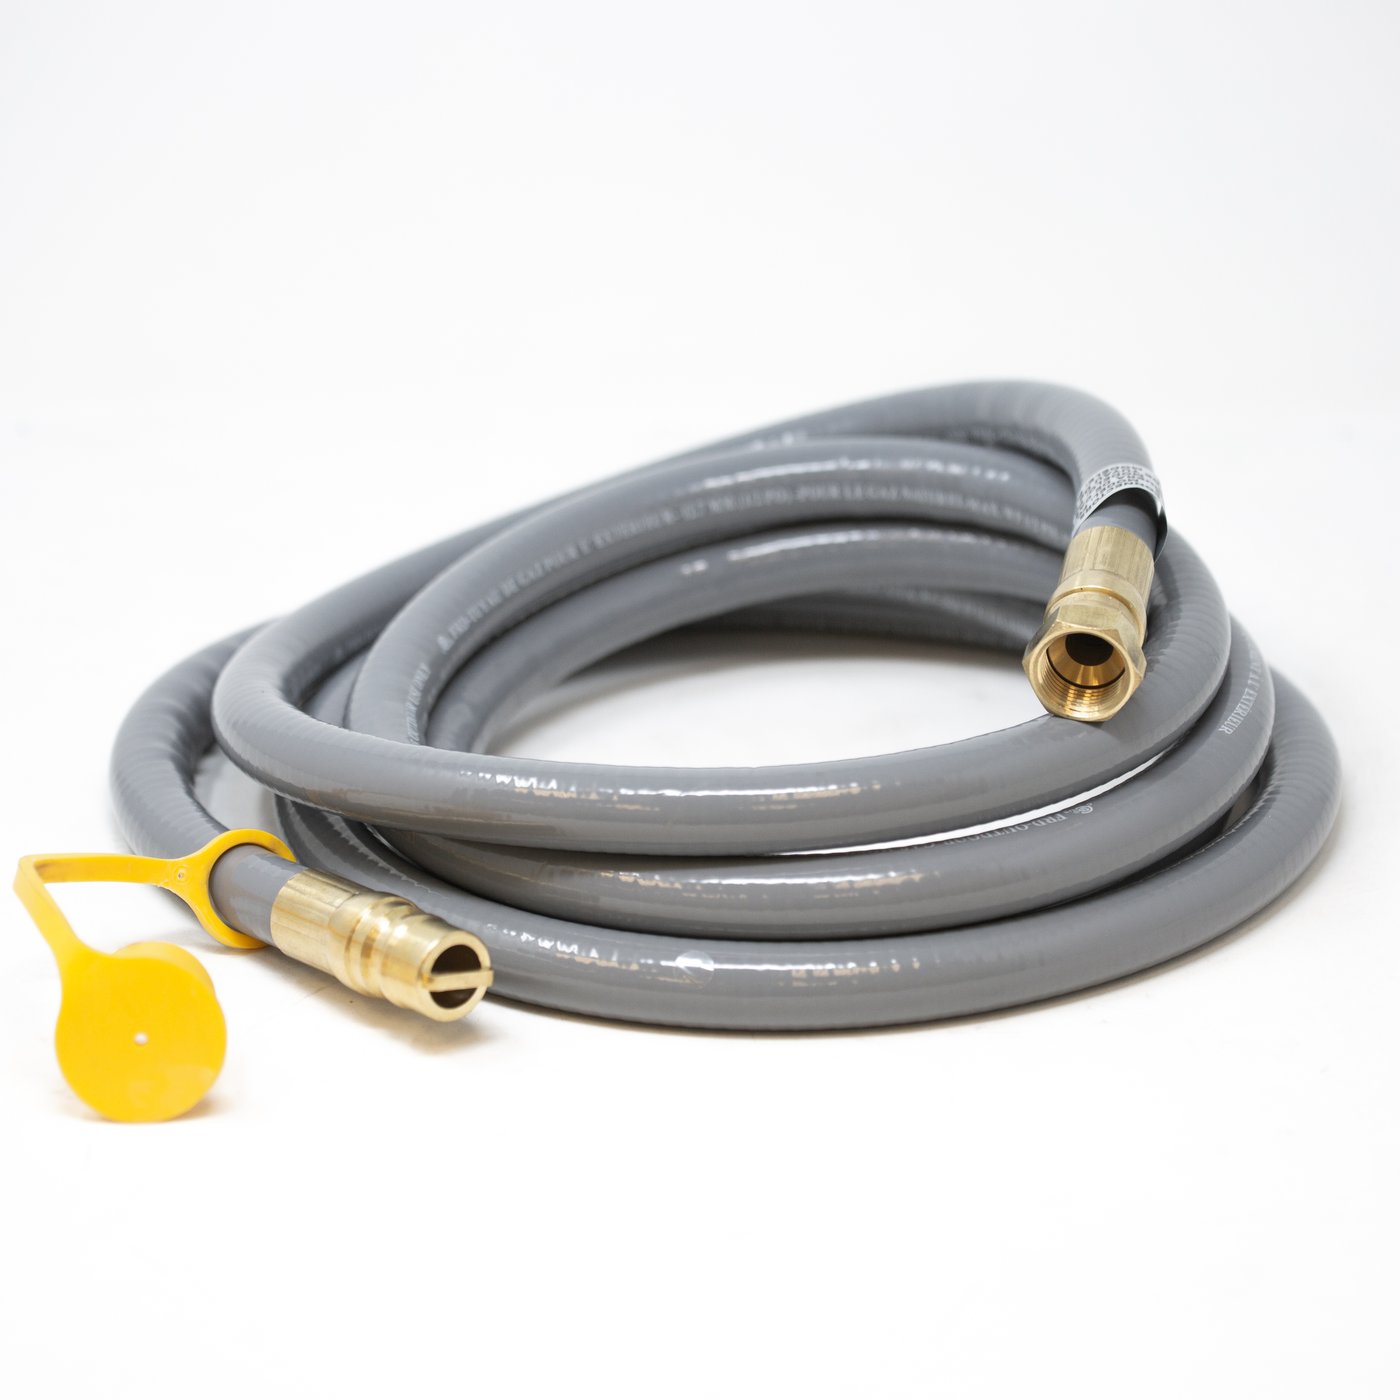 Firman, Firman 10' Natural Gas Hose With Storage Strap 1805 New